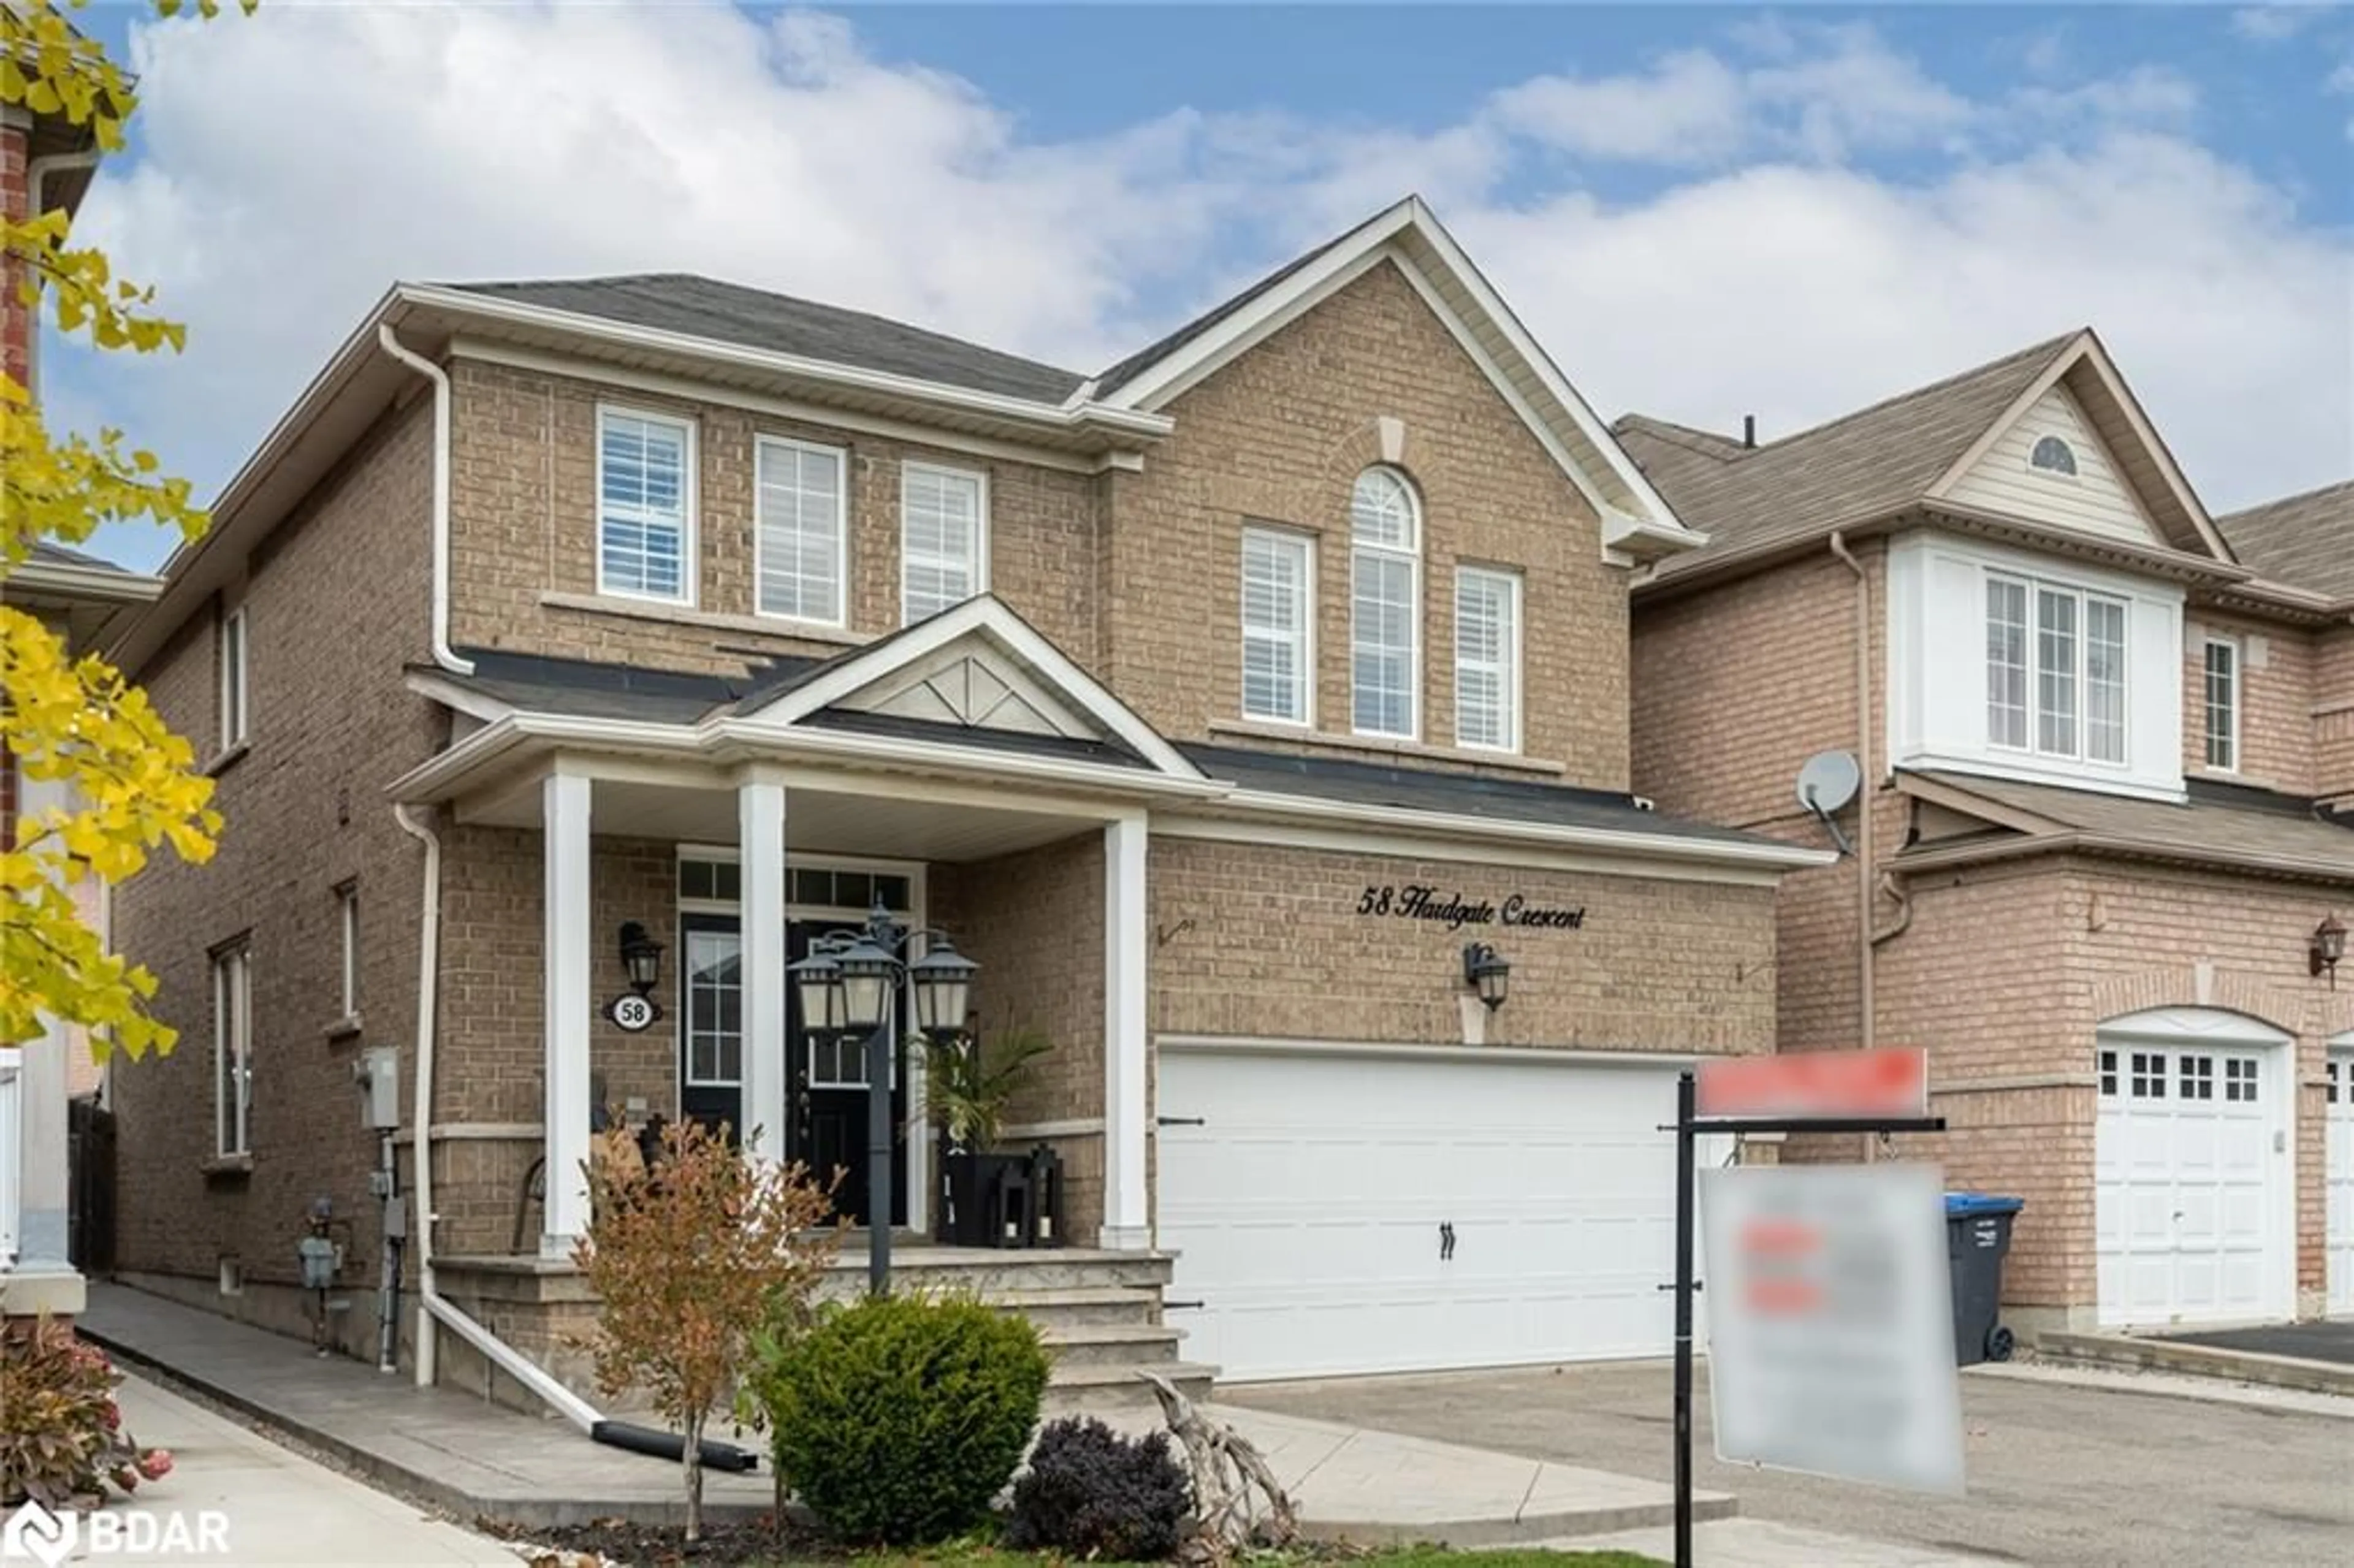 Home with brick exterior material for 58 Hardgate Cres, Brampton Ontario L7A 3V7